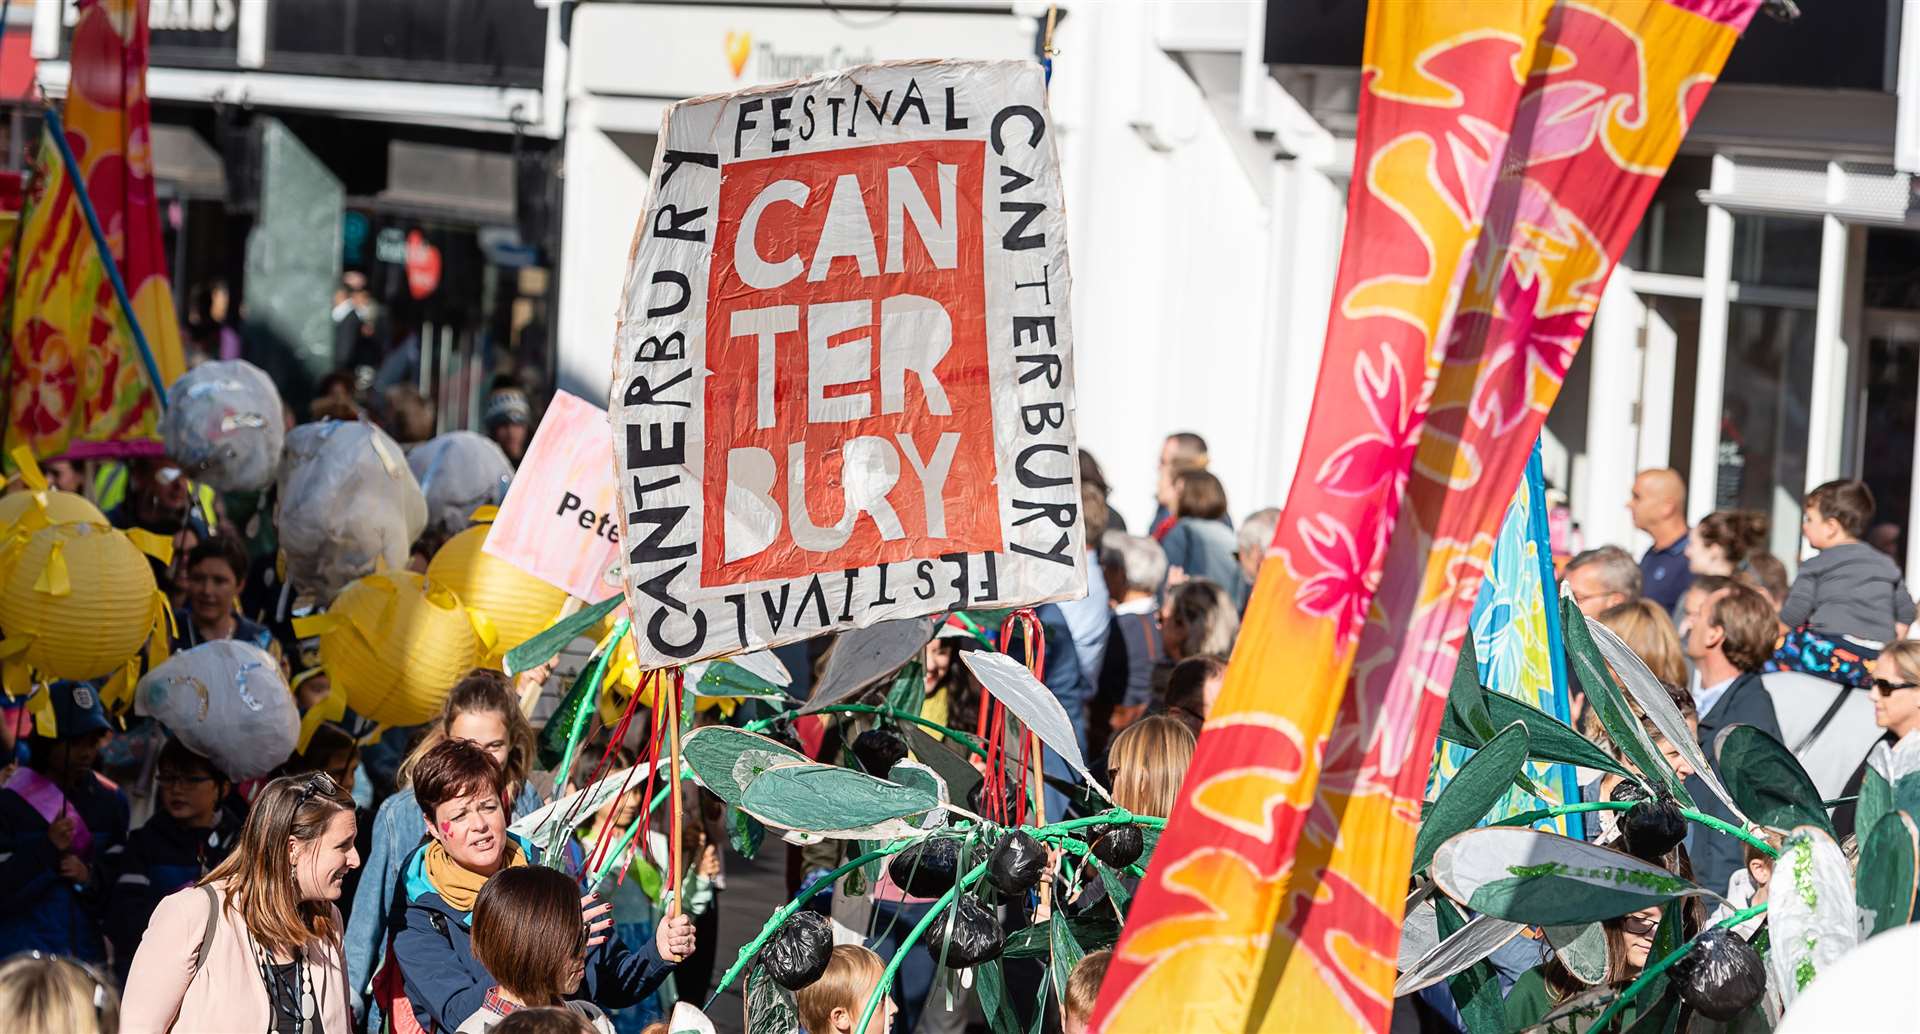 Canterbury Festival returns with a must-see programme of music, performance, talks, family events and much more from Saturday, October 19 to Saturday, November 2.